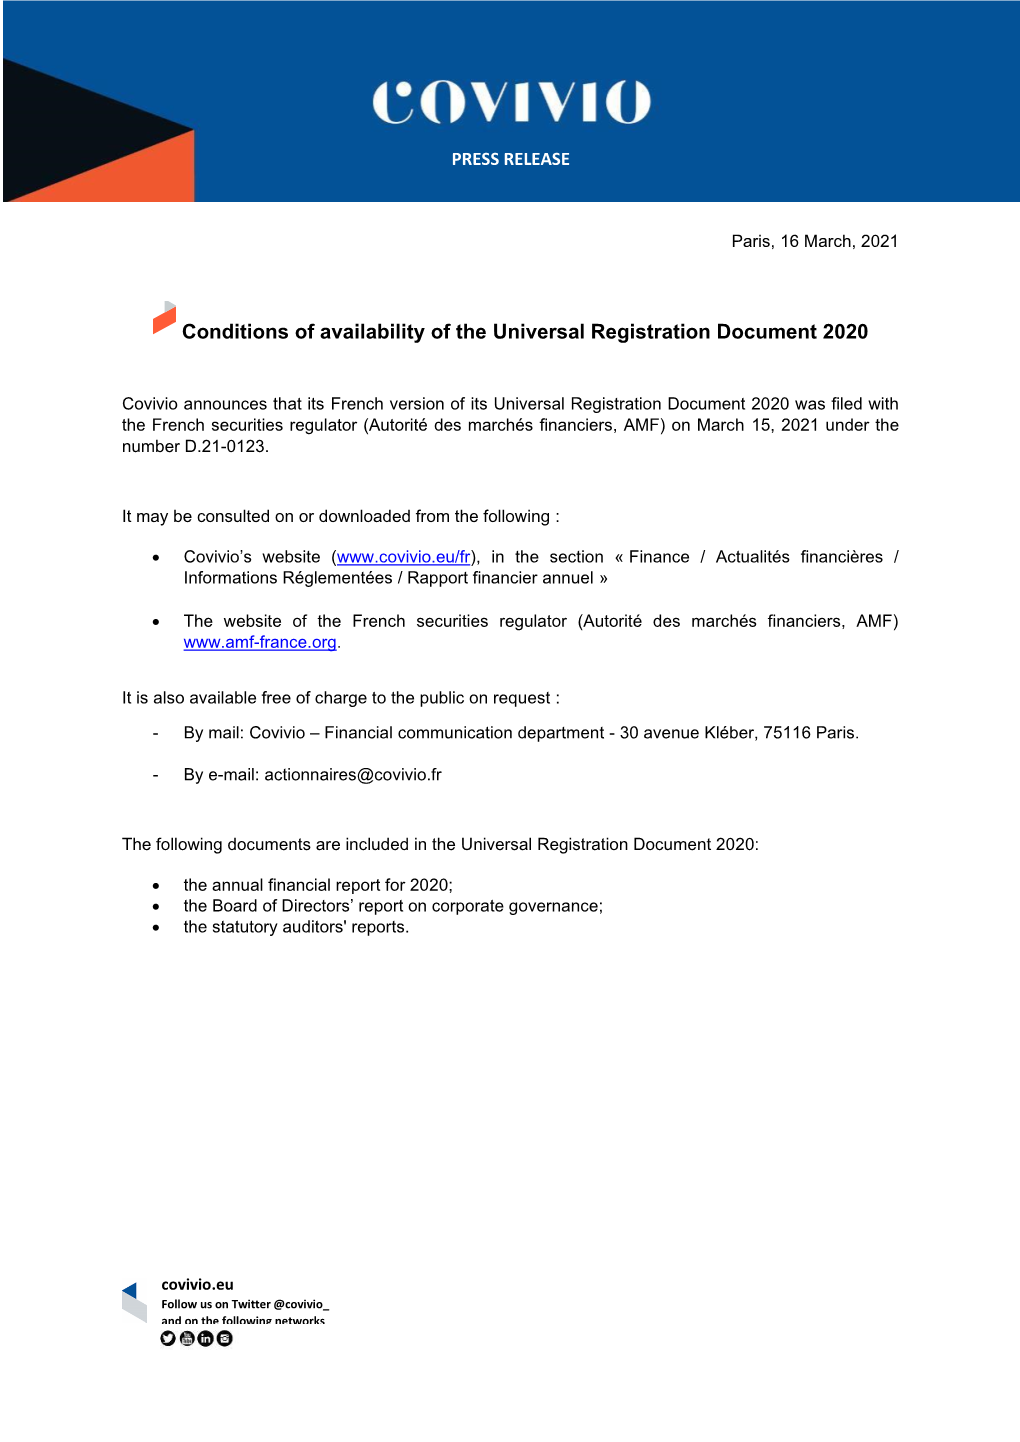 Conditions of Availability of the Universal Registration Document 2020